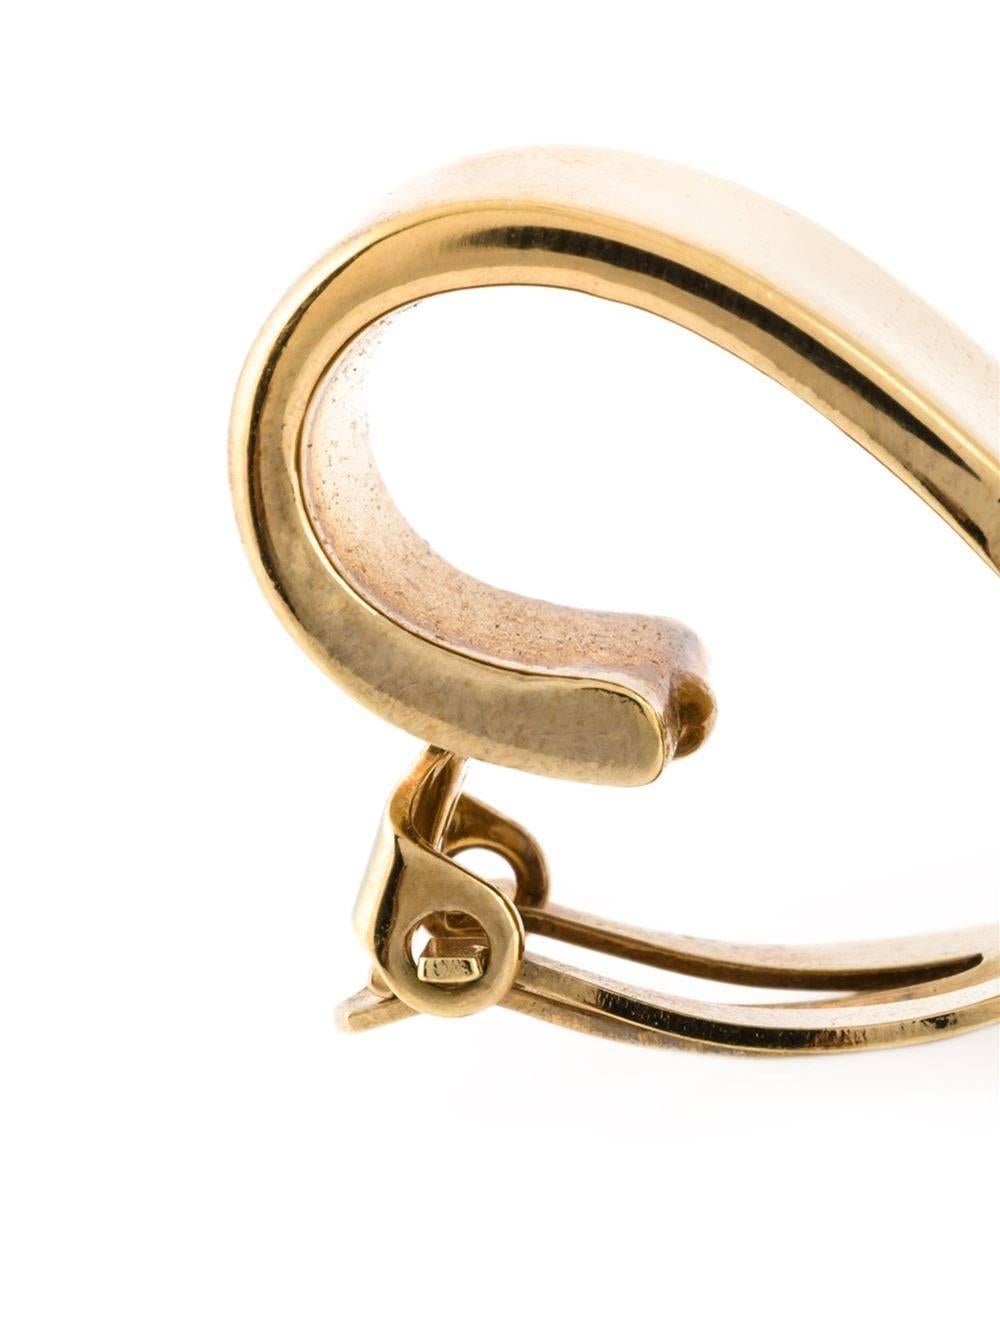 Gold-tone logo engraved mini hoop earrings from Céline Vintage featuring a clip on fastening. 

Colour: Gold

Material: Gold-plated metal, glass

Measurements: width: 1.5 centimetres, length: 2 centimetres

Condition: Excellent
Light